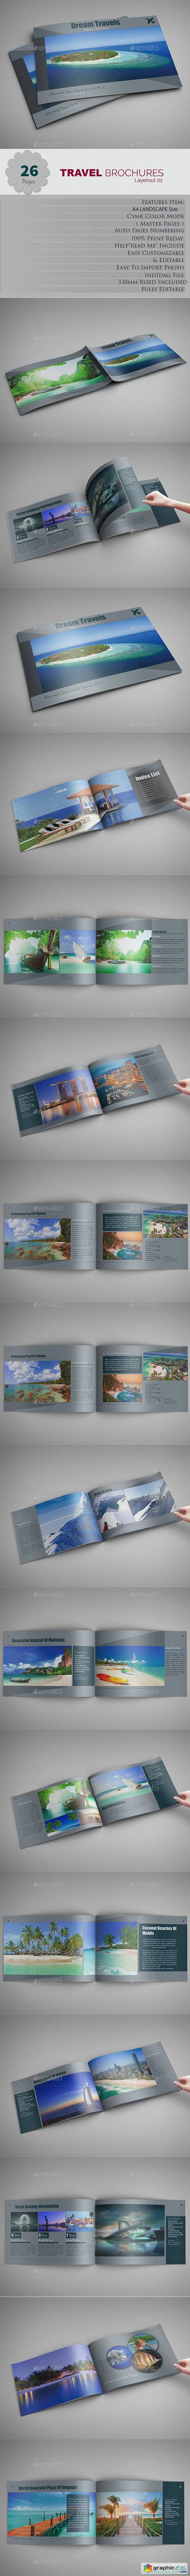 Travel Brochures Layerout 2